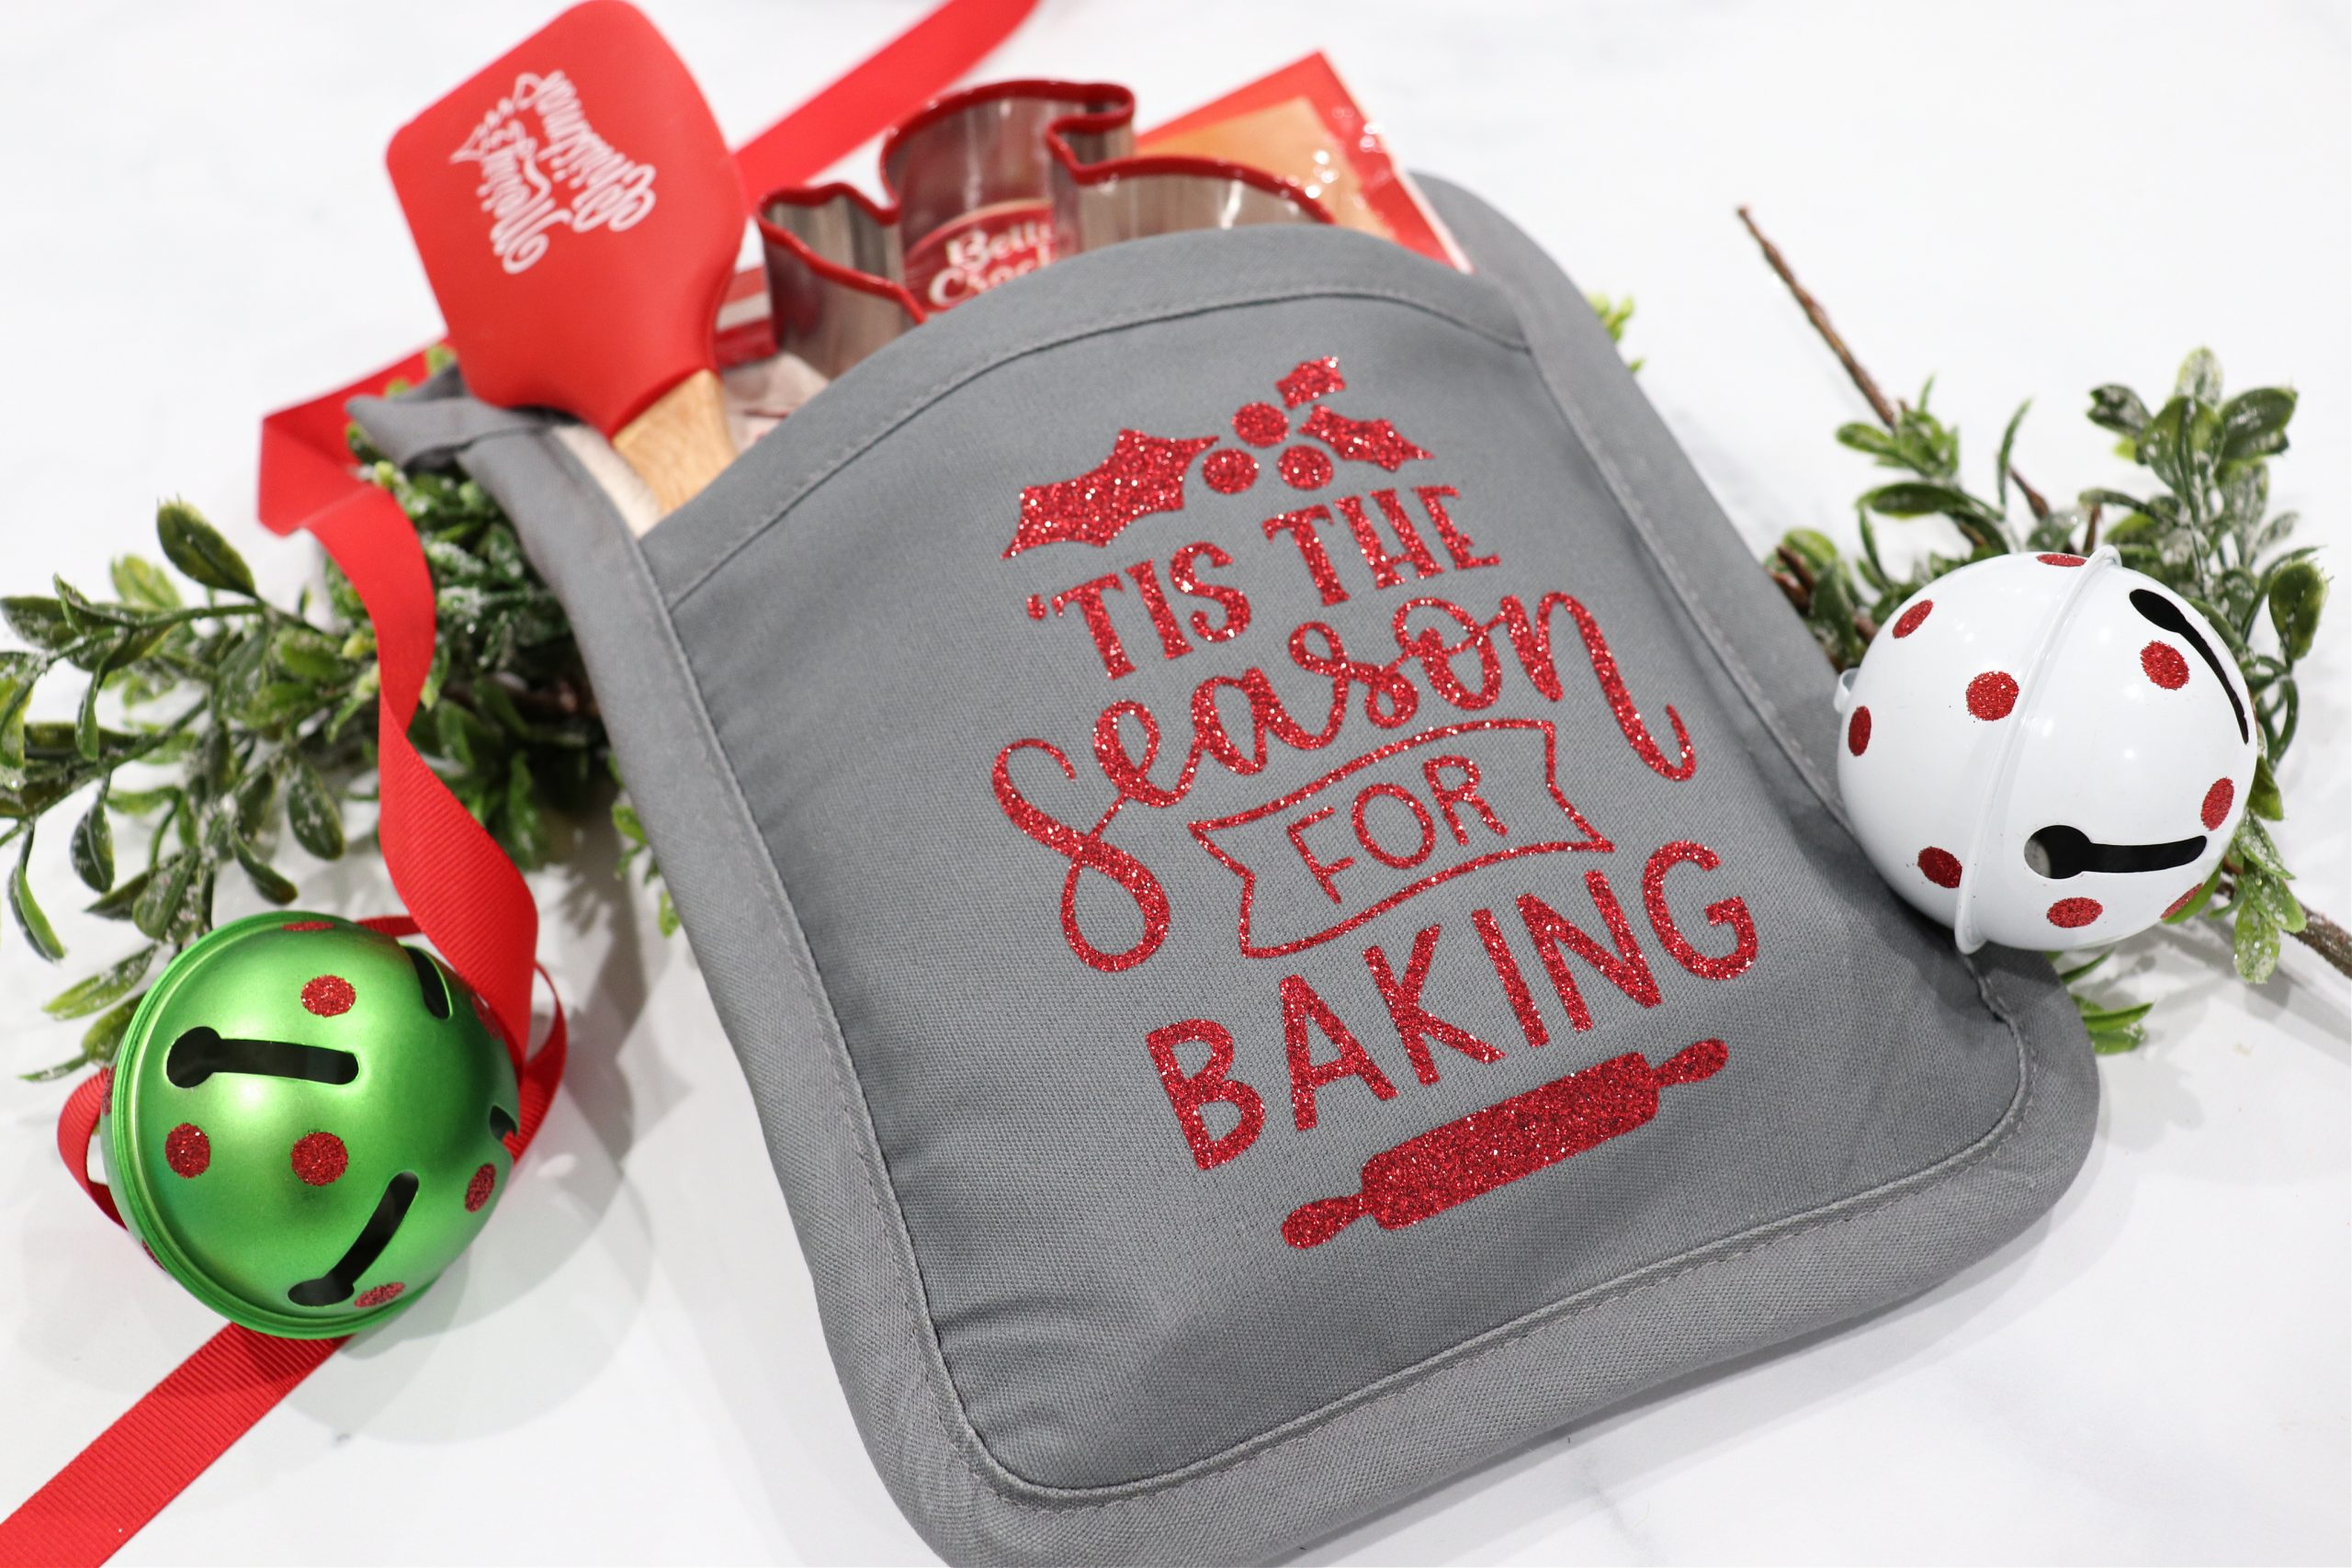 Gift Guide 2020: Let's Bake All the Things!